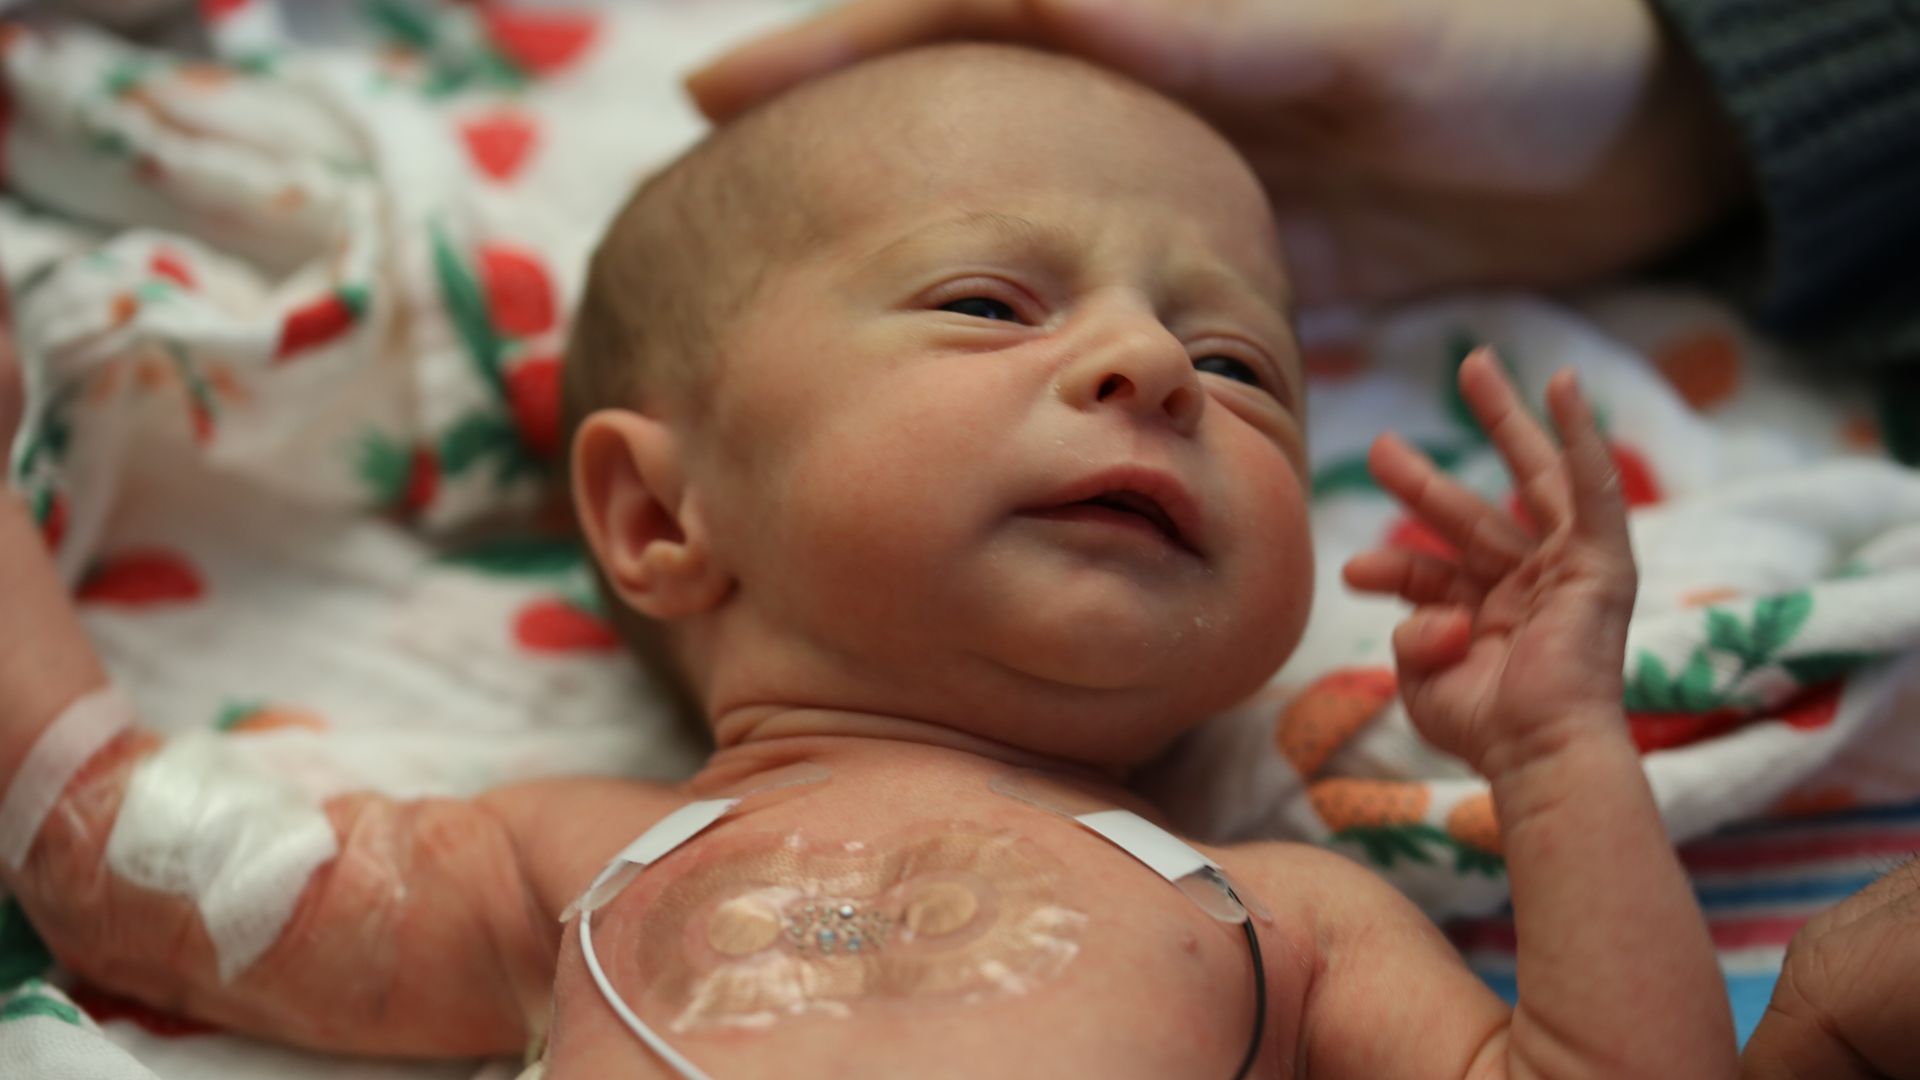 Photo of a newborn baby in NICU with sensors and wires attached to the baby